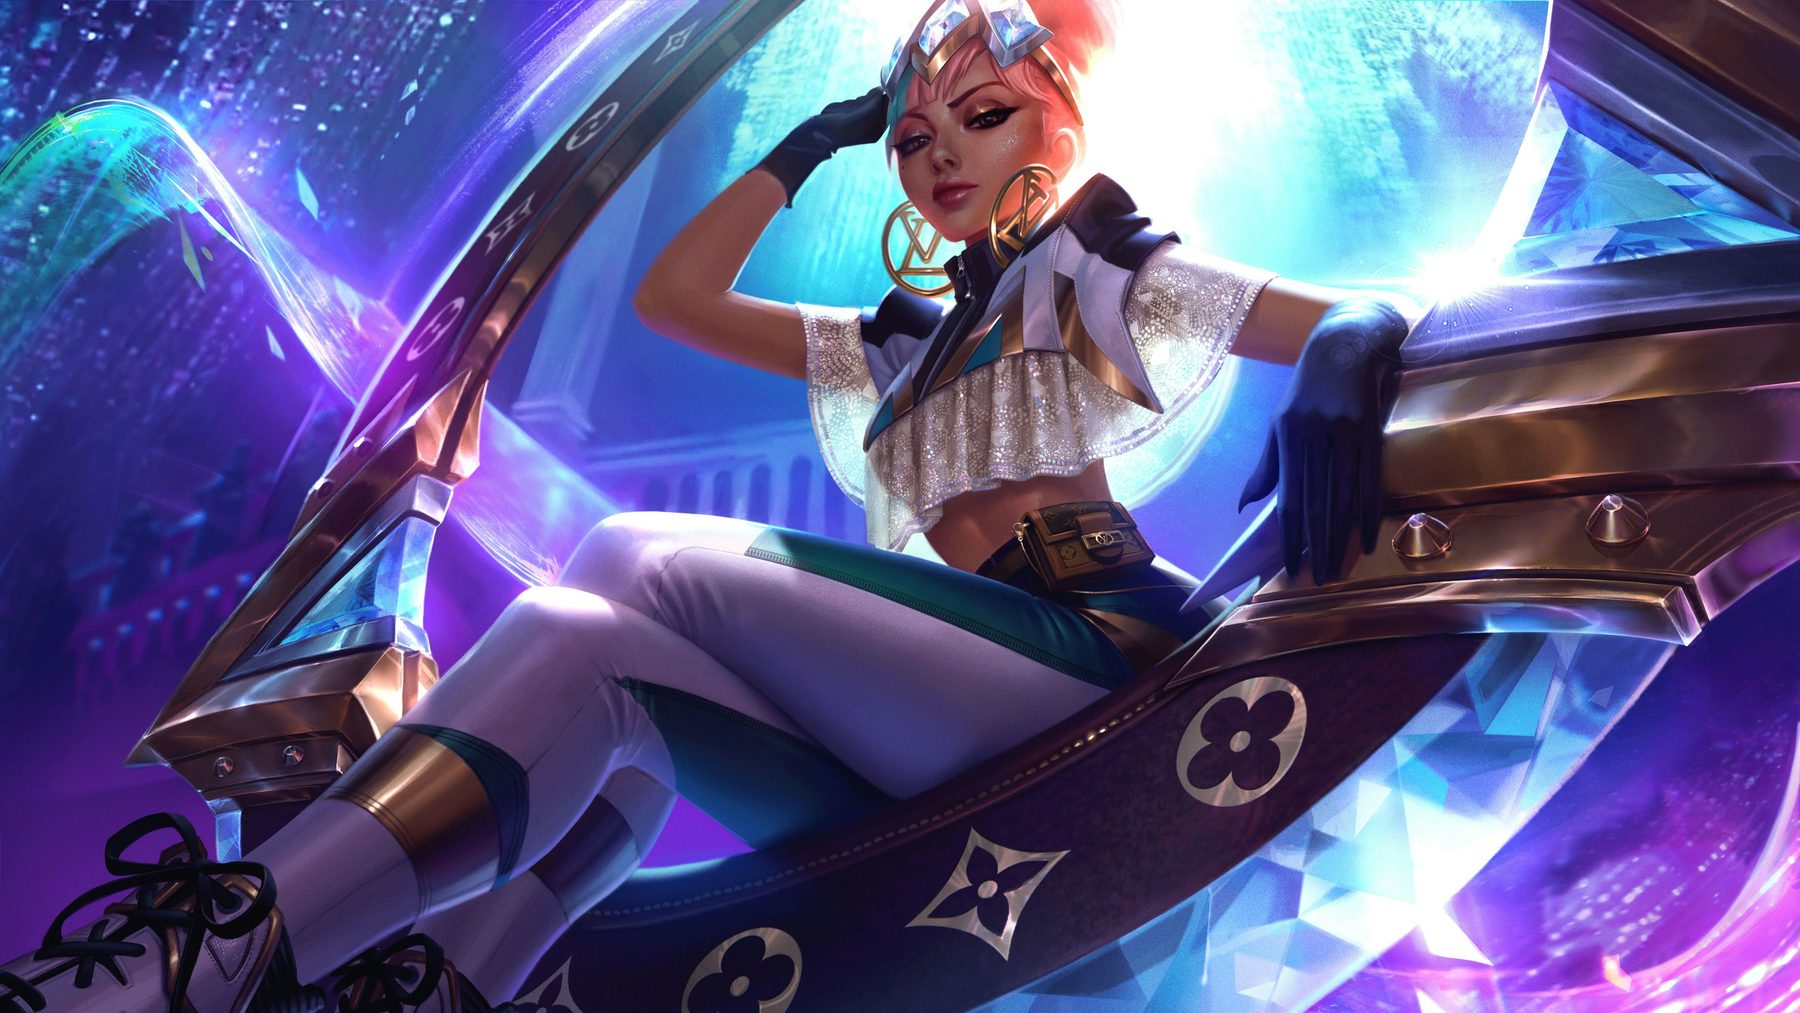 Louis Vuitton has collaborated with Riot Games' League of Legends to create branded virtual assets for the video game. Louis Vuitton.